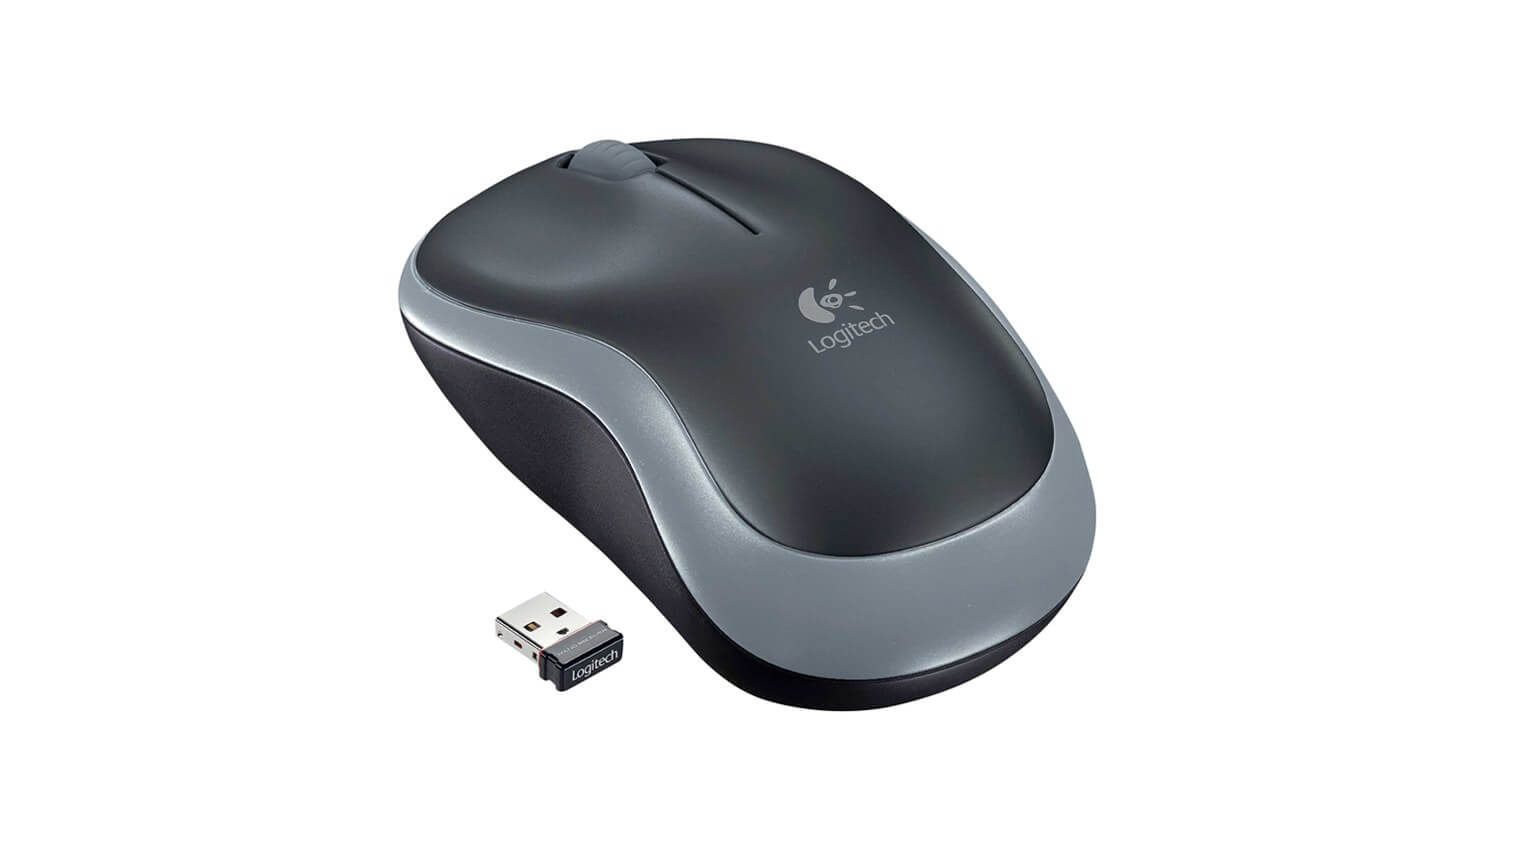 Logitech's M185 and other popular wireless mice are vulnerable to MouseJack attacks